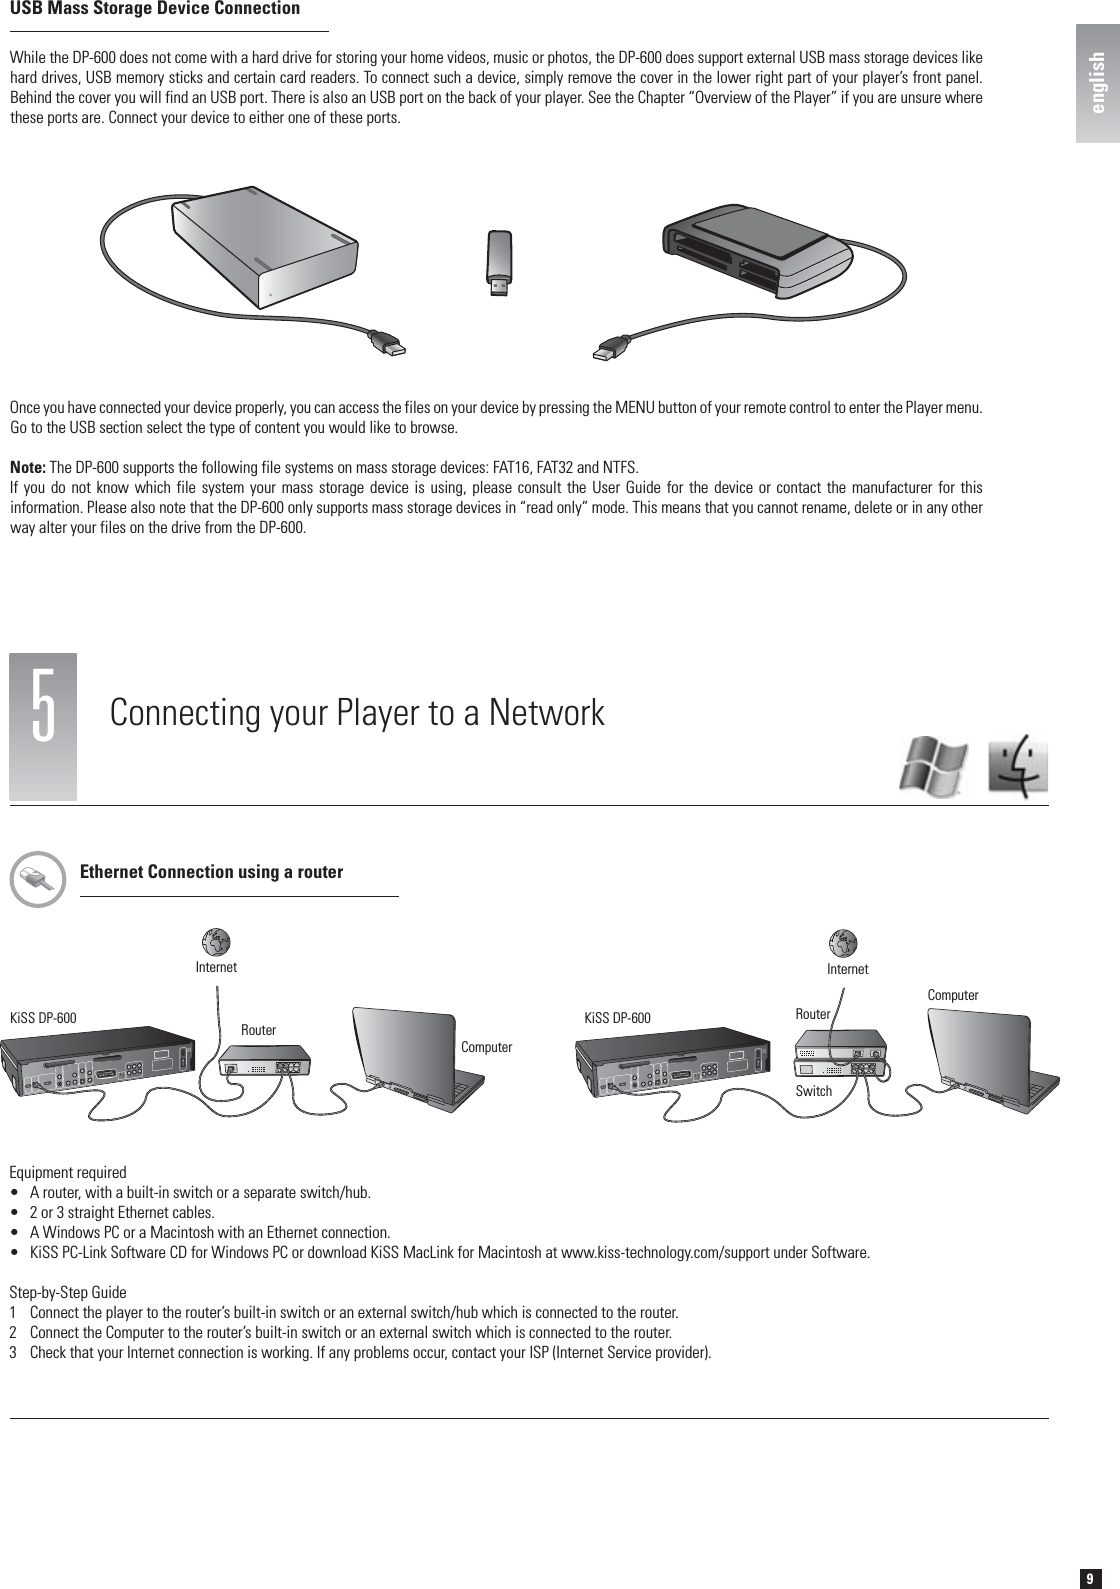 9english5Connecting your Player to a NetworkEthernet Connection using a routerEquipment required•  A router, with a built-in switch or a separate switch/hub.•  2 or 3 straight Ethernet cables.•  A Windows PC or a Macintosh with an Ethernet connection.•  KiSS PC-Link Software CD for Windows PC or download KiSS MacLink for Macintosh at www.kiss-technology.com/support under Software.Step-by-Step Guide1  Connect the player to the router’s built-in switch or an external switch/hub which is connected to the router.2  Connect the Computer to the router’s built-in switch or an external switch which is connected to the router.3  Check that your Internet connection is working. If any problems occur, contact your ISP (Internet Service provider).KiSS DP-600ComputerRouterInternetKiSS DP-600SwitchRouterComputerInternetWhile the DP-600 does not come with a hard drive for storing your home videos, music or photos, the DP-600 does support external USB mass storage devices like hard drives, USB memory sticks and certain card readers. To connect such a device, simply remove the cover in the lower right part of your player’s front panel. Behind the cover you will find an USB port. There is also an USB port on the back of your player. See the Chapter “Overview of the Player” if you are unsure where these ports are. Connect your device to either one of these ports.Once you have connected your device properly, you can access the files on your device by pressing the MENU button of your remote control to enter the Player menu. Go to the USB section select the type of content you would like to browse.Note: The DP-600 supports the following file systems on mass storage devices: FAT16, FAT32 and NTFS.If you do not know which file system your mass storage device is using, please consult the User Guide for the device or contact the manufacturer for this information. Please also note that the DP-600 only supports mass storage devices in “read only” mode. This means that you cannot rename, delete or in any other way alter your files on the drive from the DP-600.USB Mass Storage Device Connectionenglish